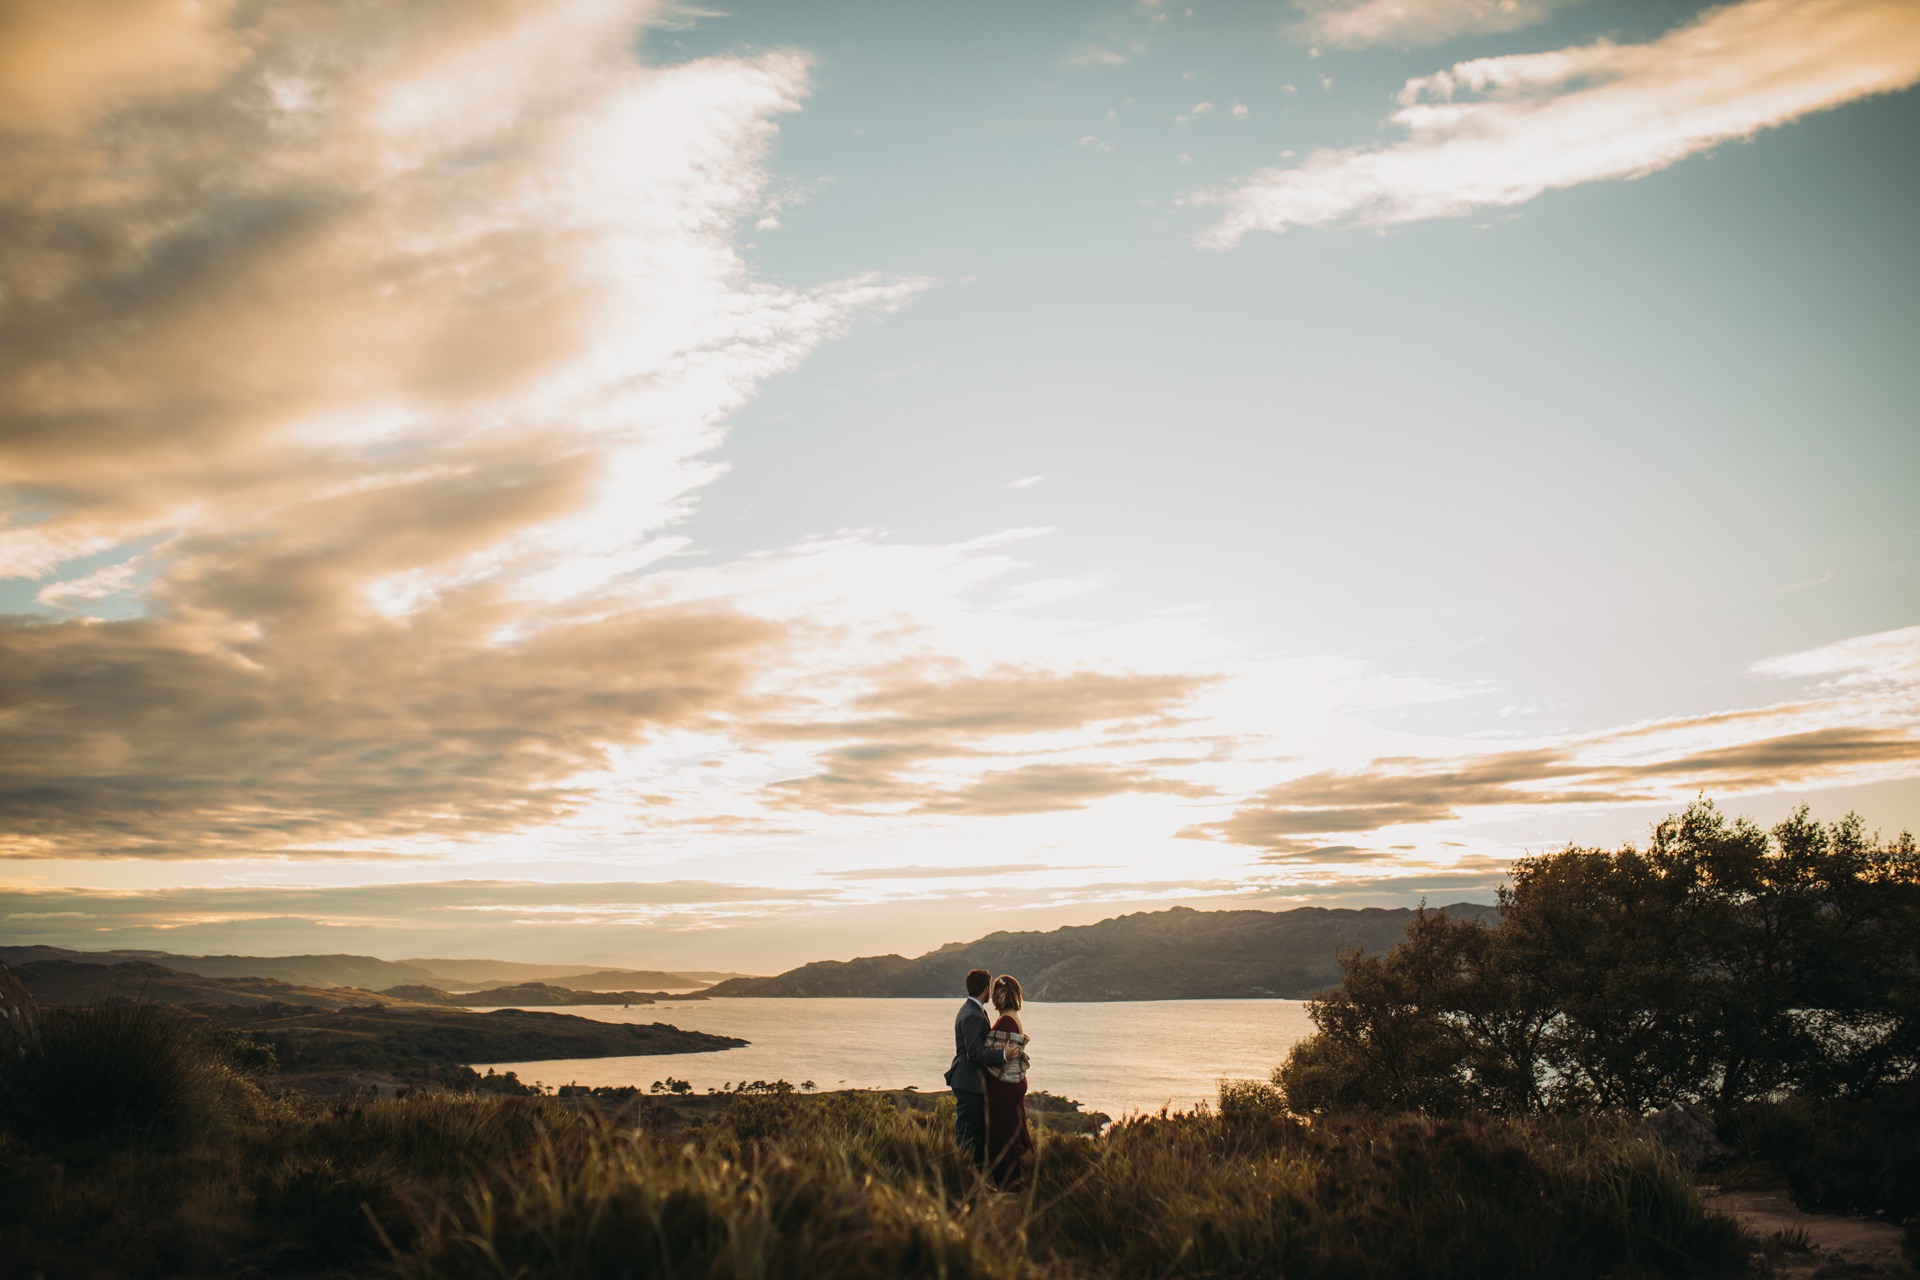 eloping to scotland romantic elopement photography Scotland newlyweds and epic golden view over Torridon